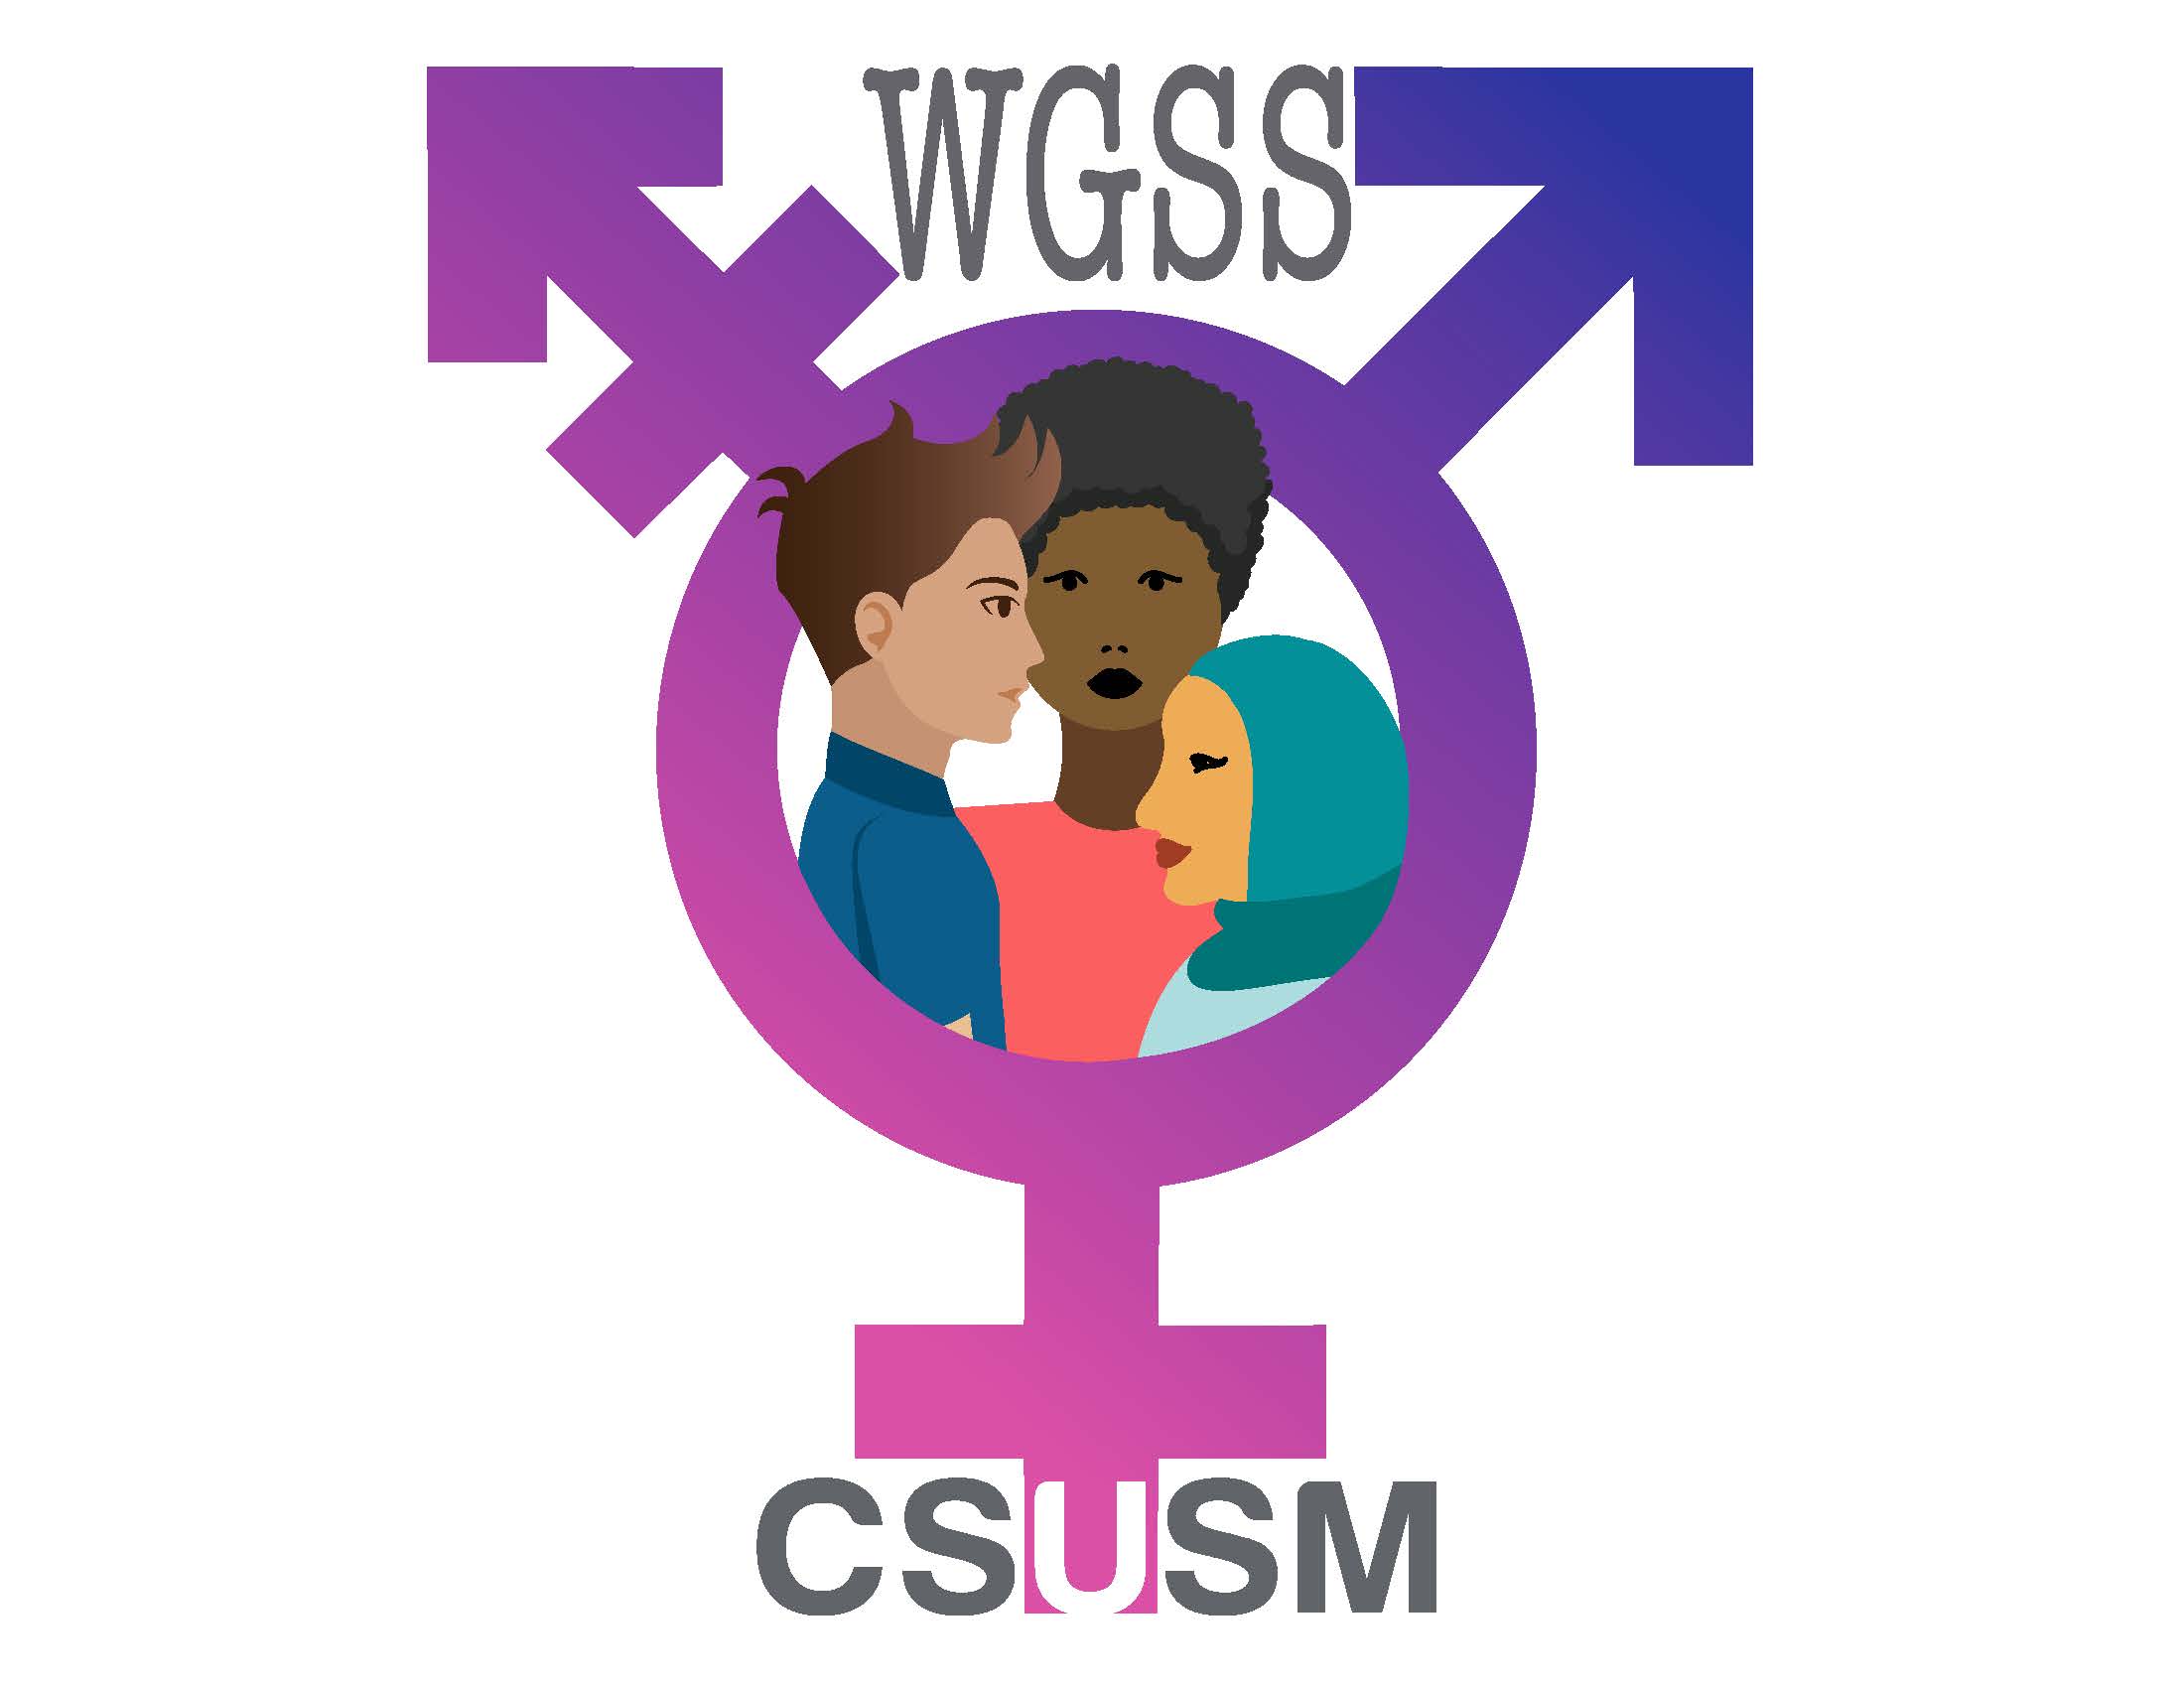 gender spectrum symbol with diverse faces in the center